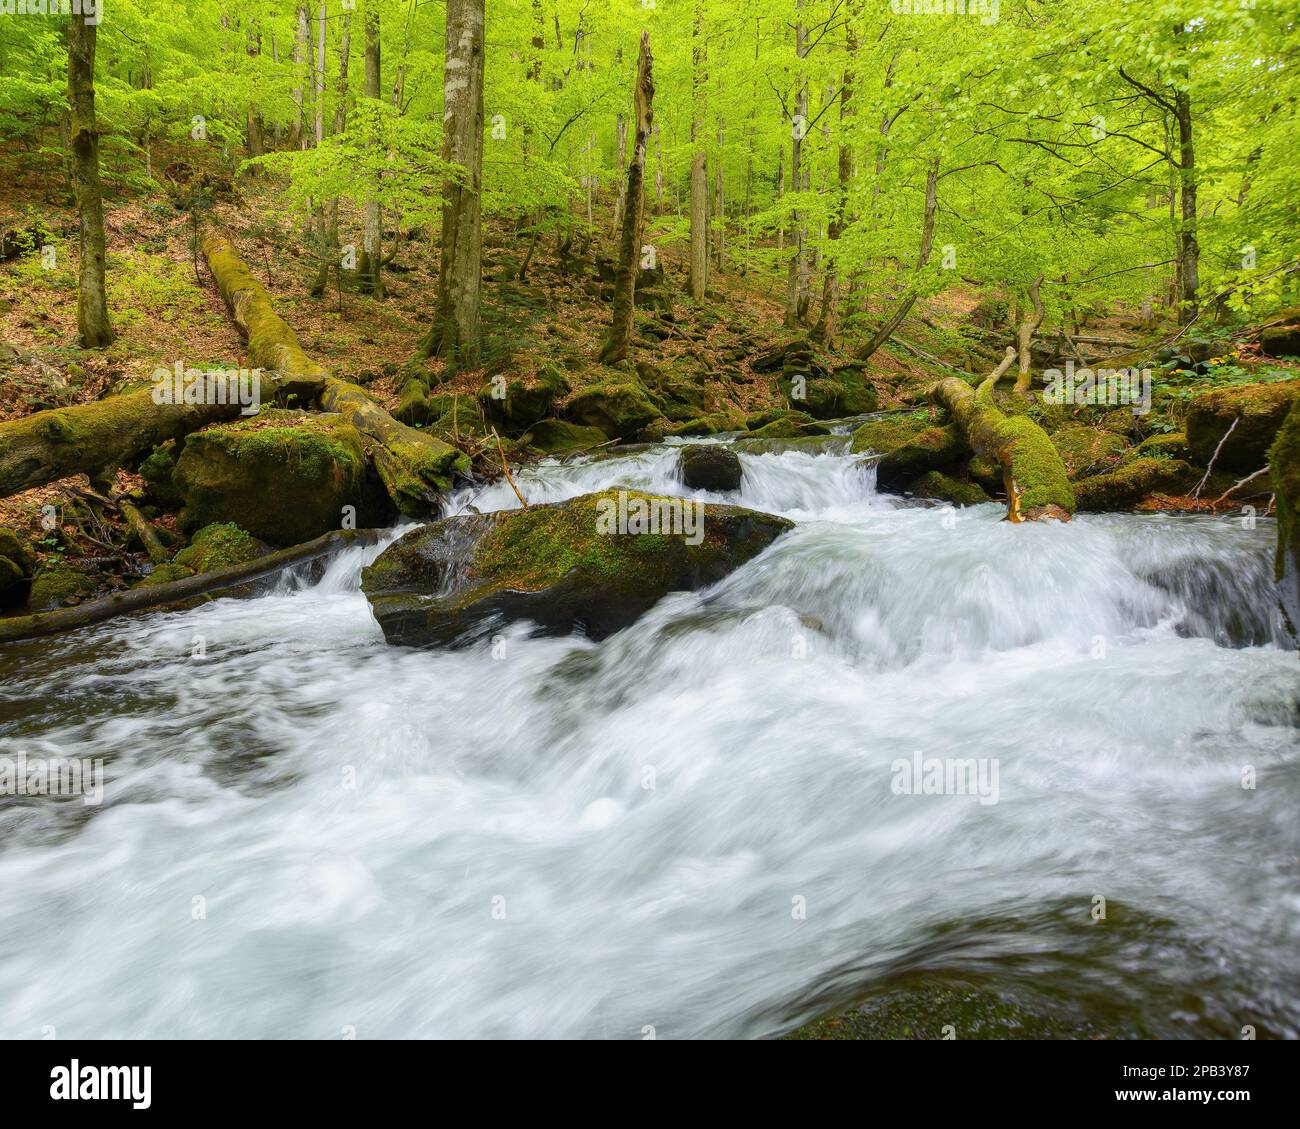 river in the park among boulders. outdoor nature scenery in spring Stock Photo